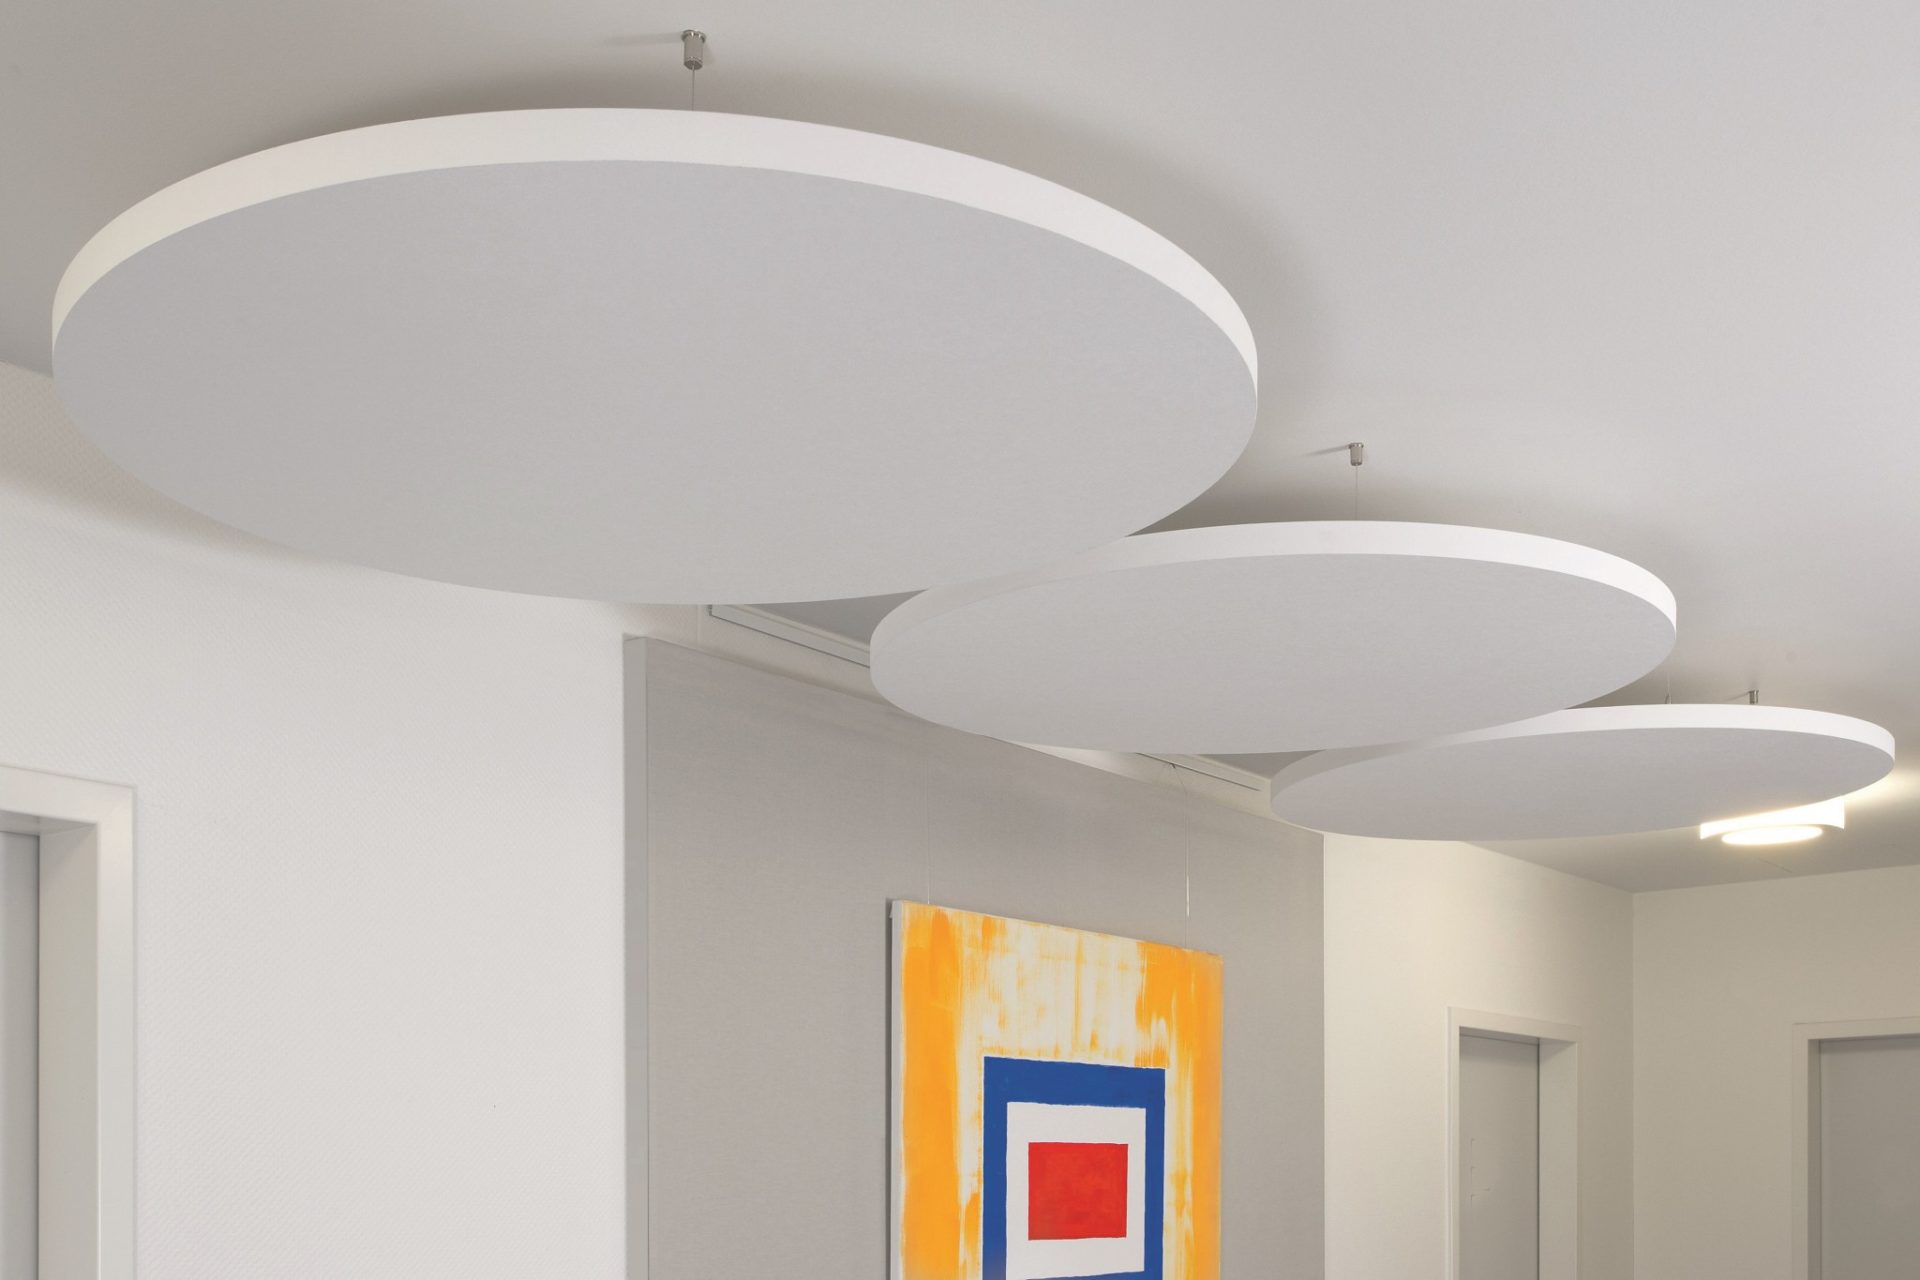 New TOPIQ acoustic ceiling solutions from Knauf AMF